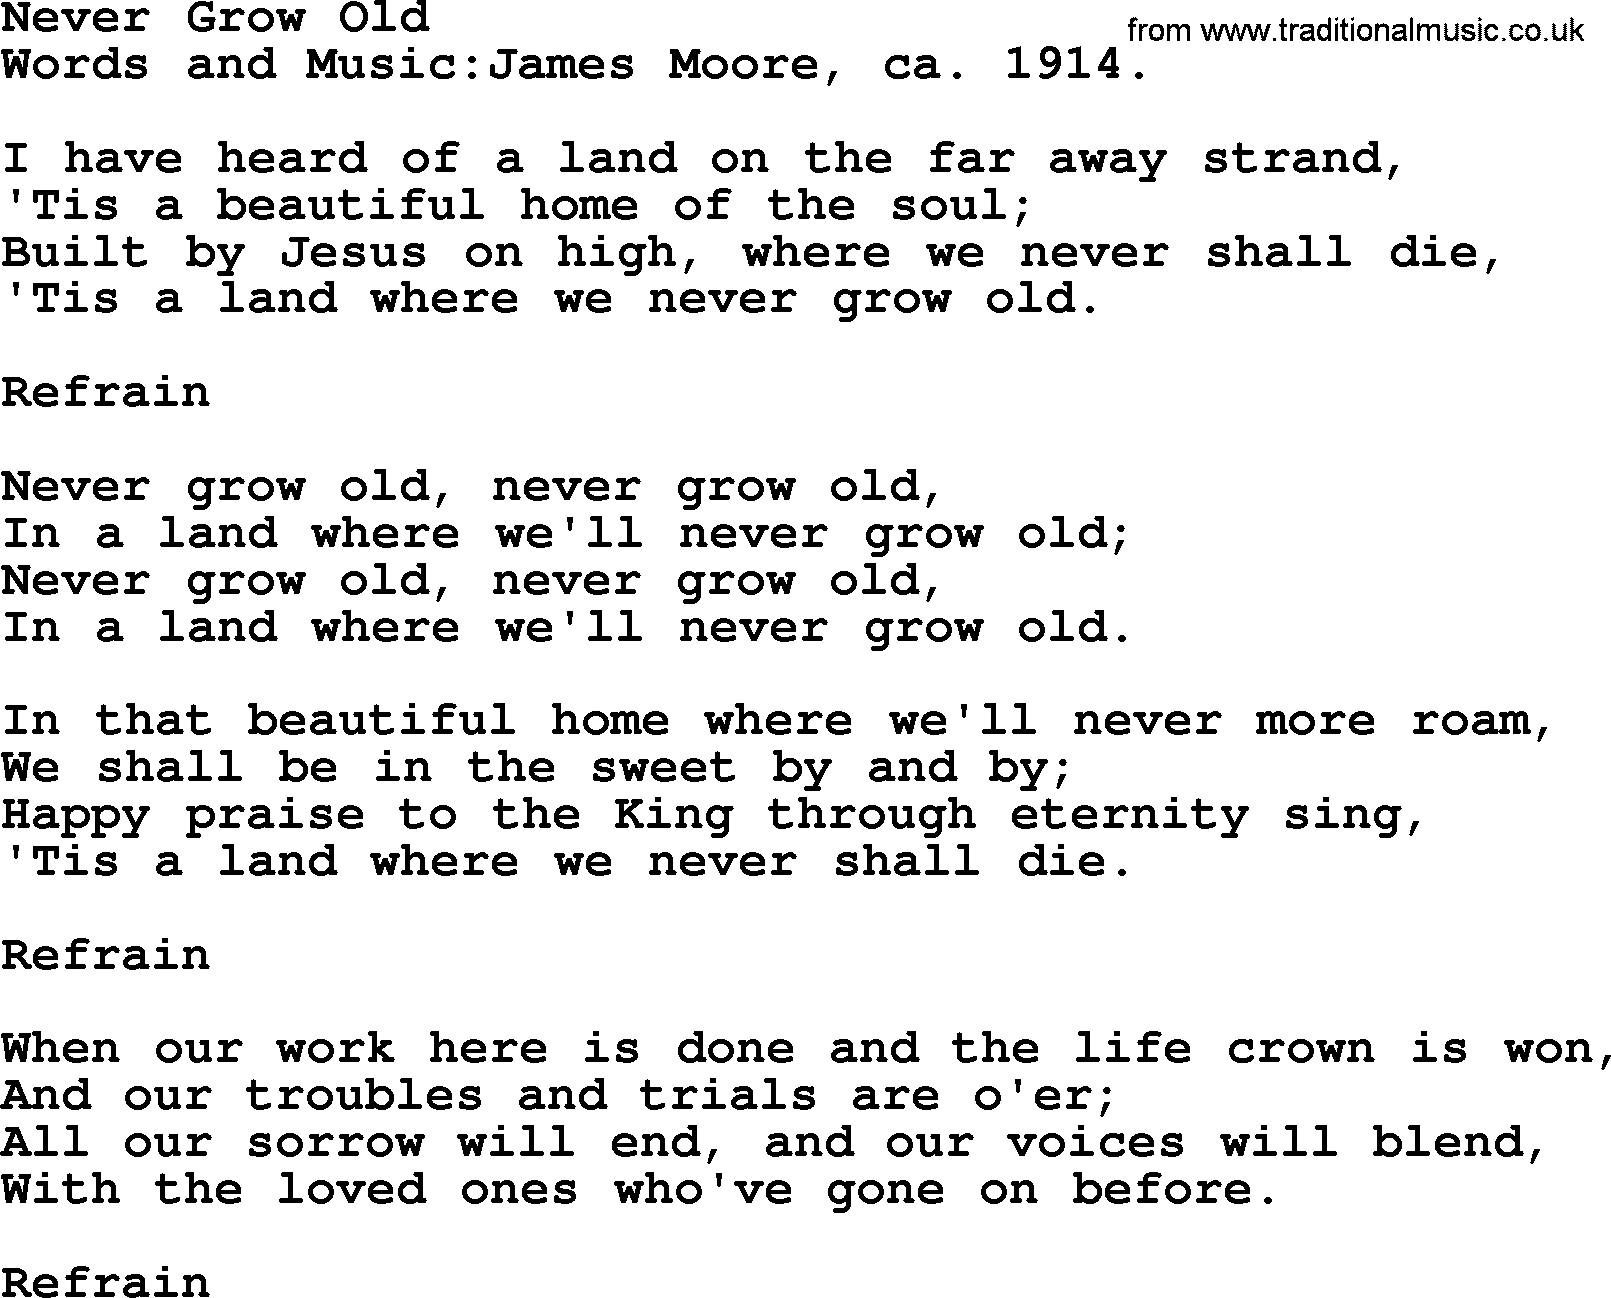 Songs and Hymns about Heaven: Never Grow Old lyrics with PDF